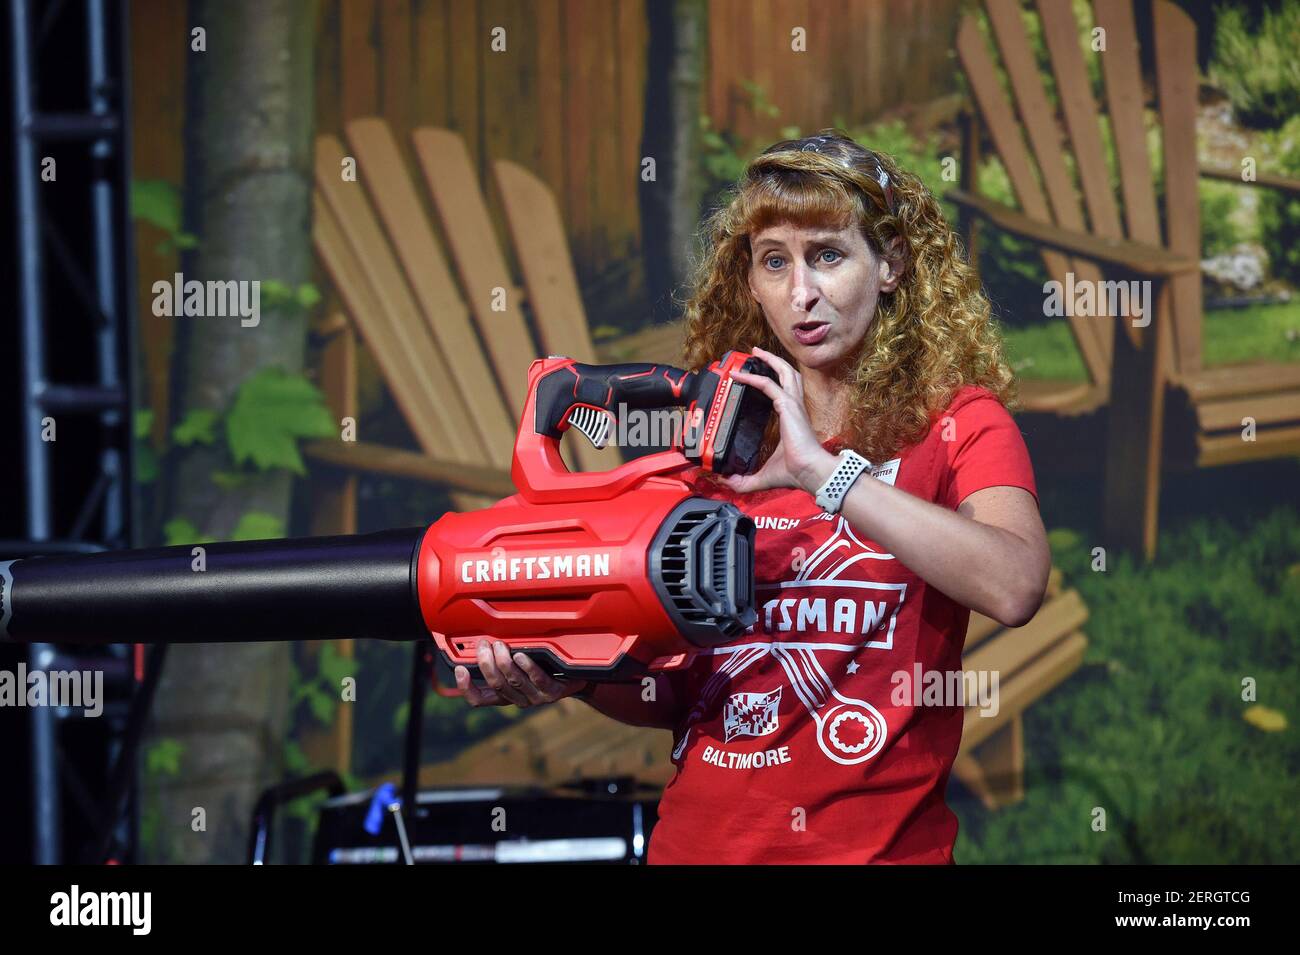 https://c8.alamy.com/comp/2ERGTCG/christine-potter-vice-president-of-outdoor-power-equipment-talks-about-the-craftsman-blower-and-the-battery-system-that-powers-many-of-their-tools-on-aug-16-2018-stanley-black-decker-which-bought-sears-craftsman-tool-line-last-year-relaunched-the-brand-at-the-craftsman-garage-in-middle-river-photo-by-kim-hairstonbaltimore-suntnssipa-usa-2ERGTCG.jpg